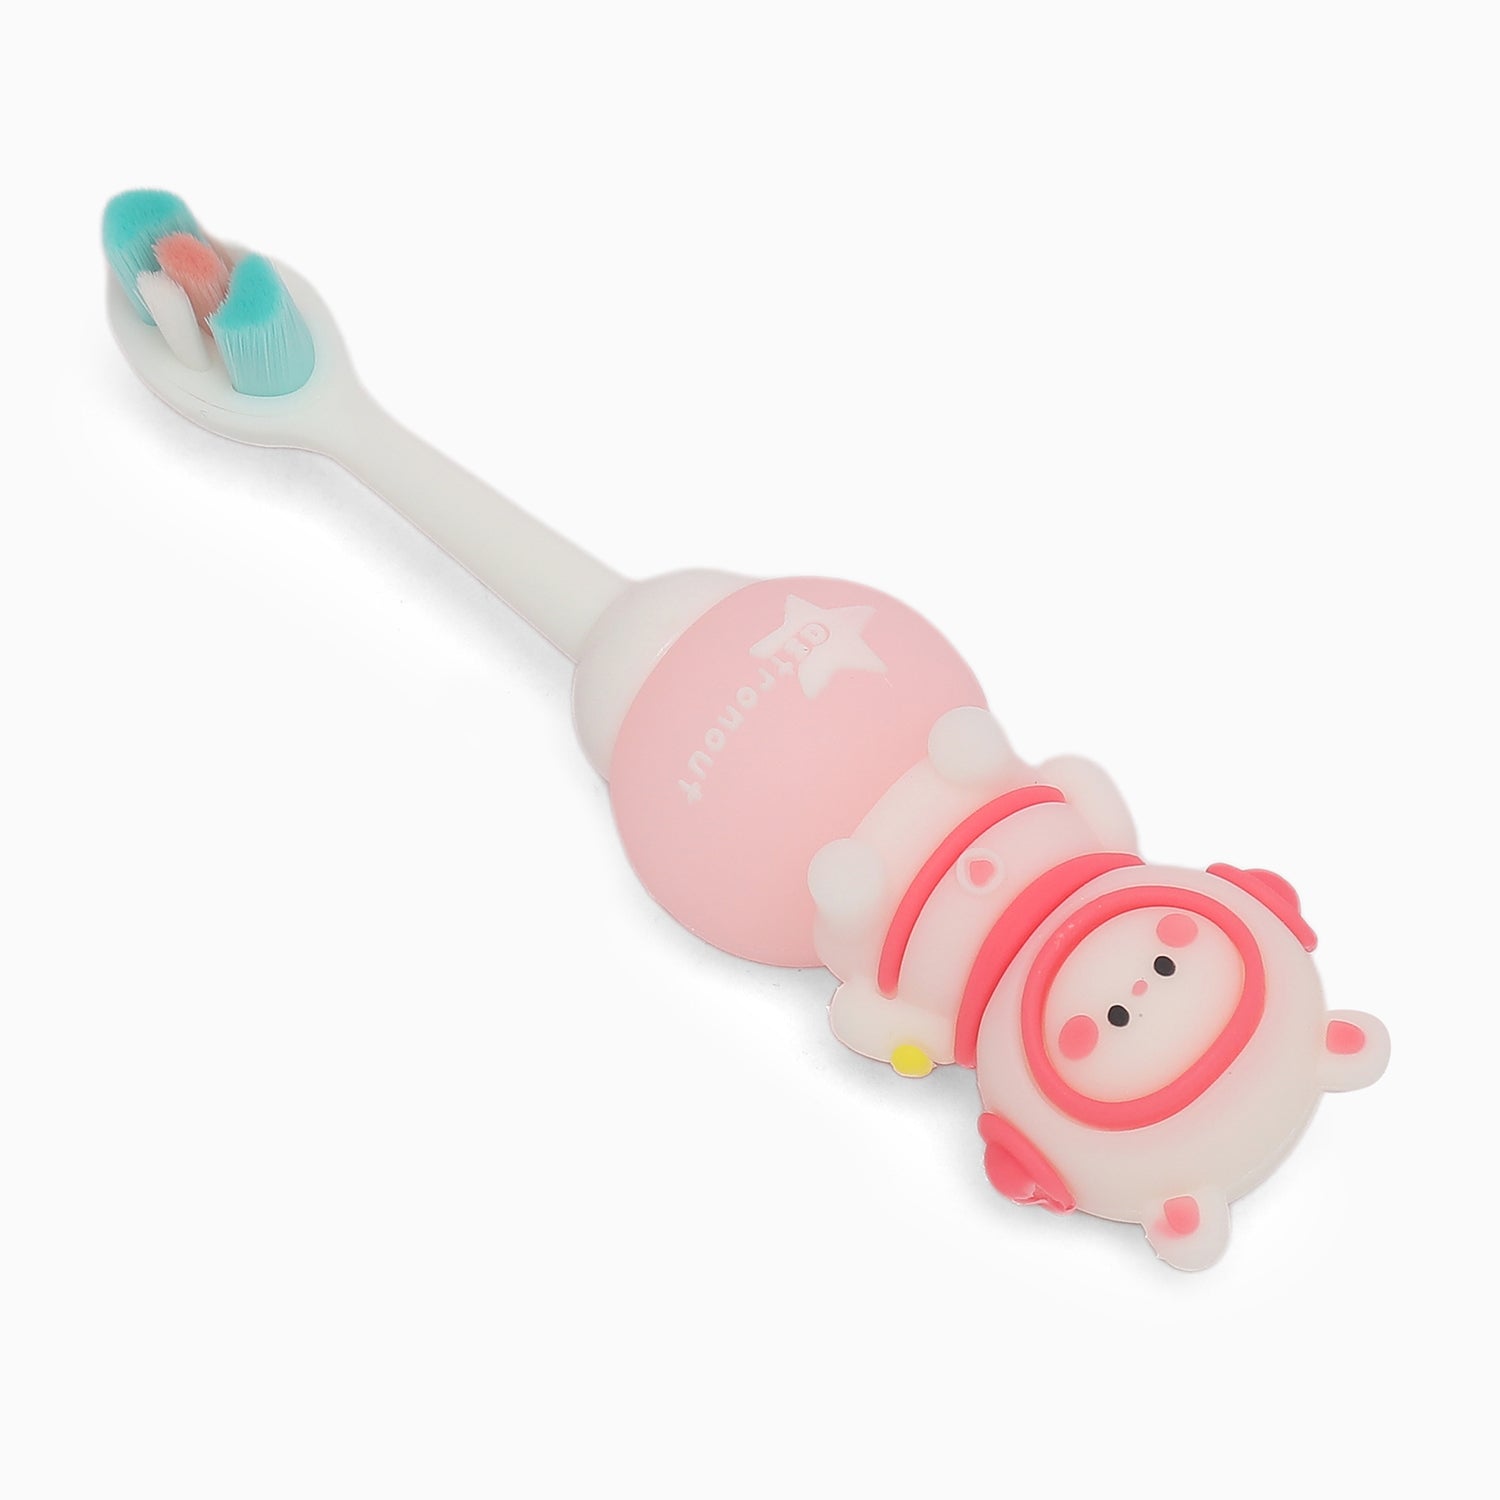 ZORSE baby toothbrush special curated for your child's teeth in style 2-7 year olds (random space bear-print)